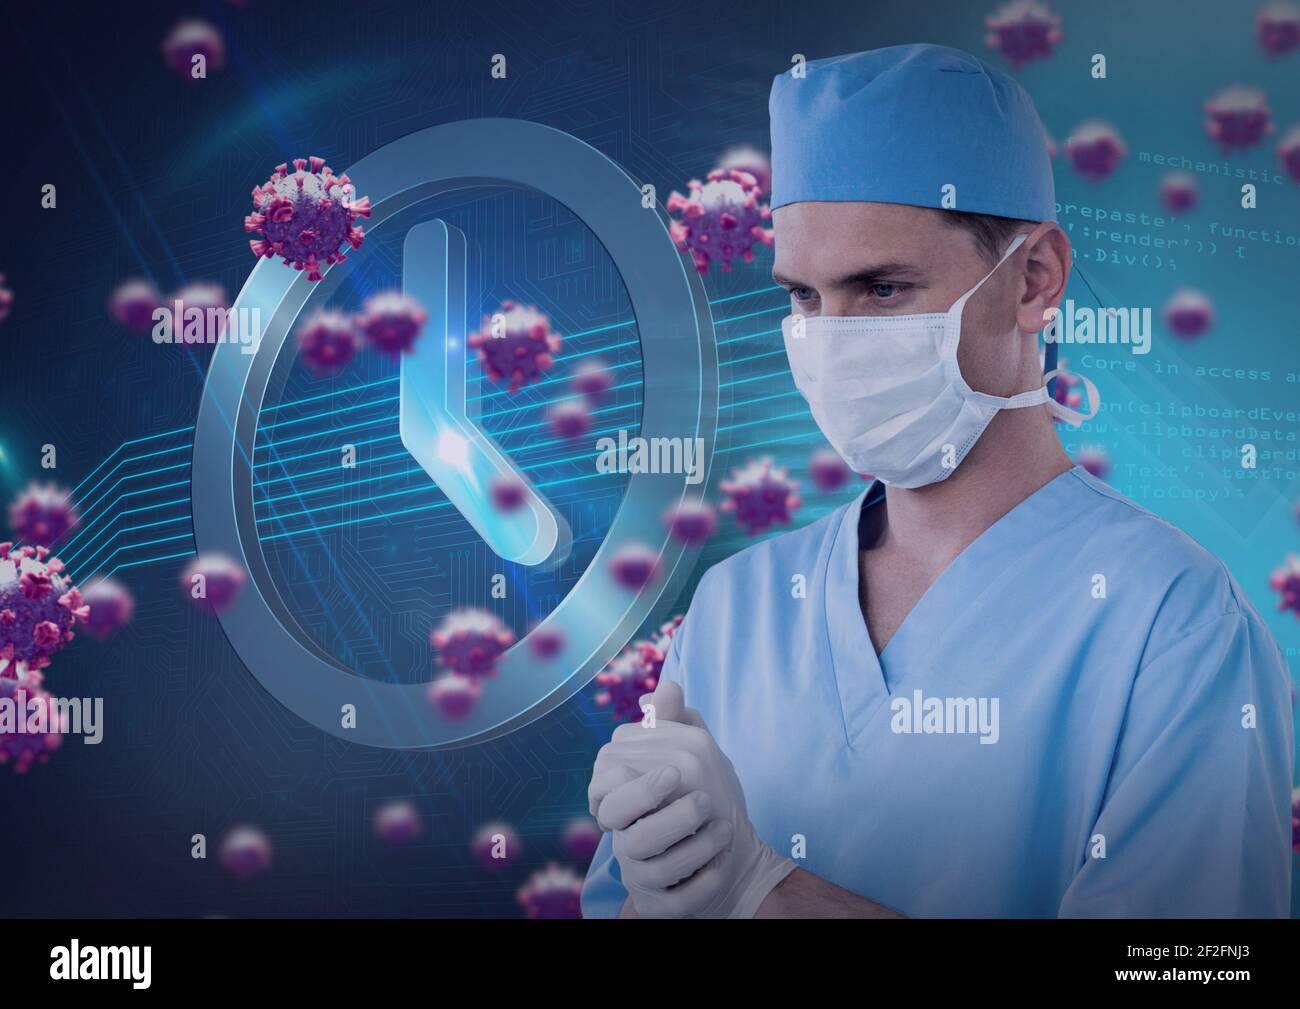 Digital clock and and covid-19 cells over male surgeon wearing face mask against blue background Stock Photo